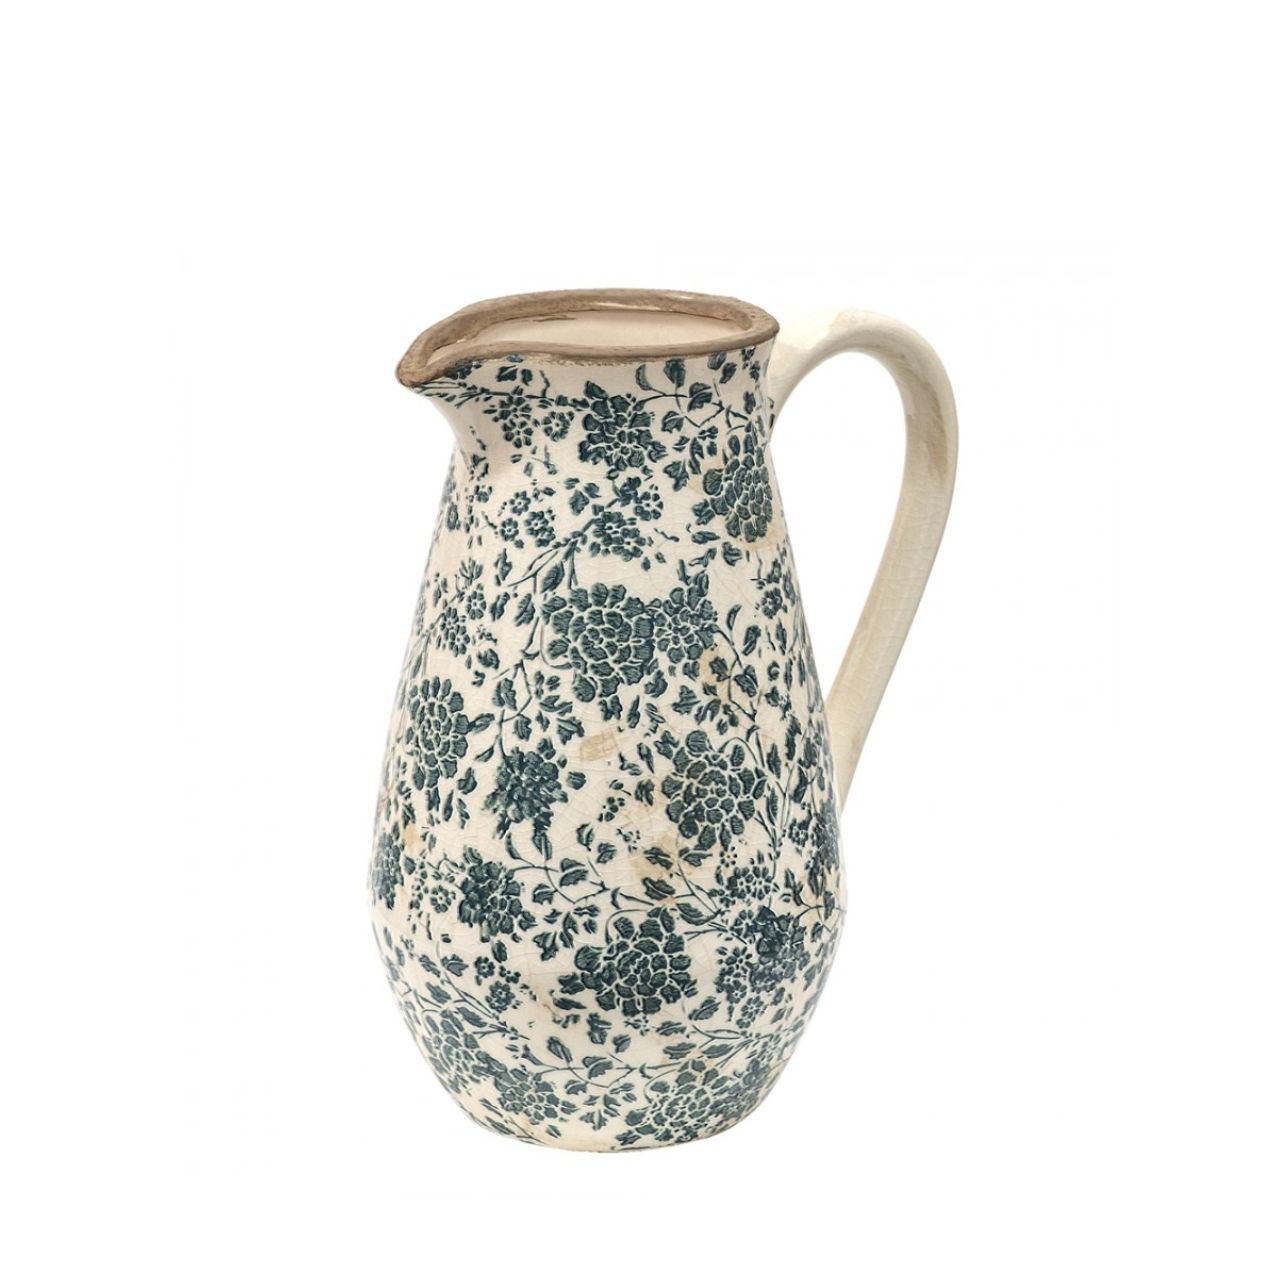 A decorative jug is the new must-have! It’s stylish and unique in its own way. You can place fun dried flowers in it or simply leave it empty. But beware! It’s a decorative jug and therefore not suitable for water. Mix and match with different heights and create a playful effect. Either way, this decorative jug is a must in your home!